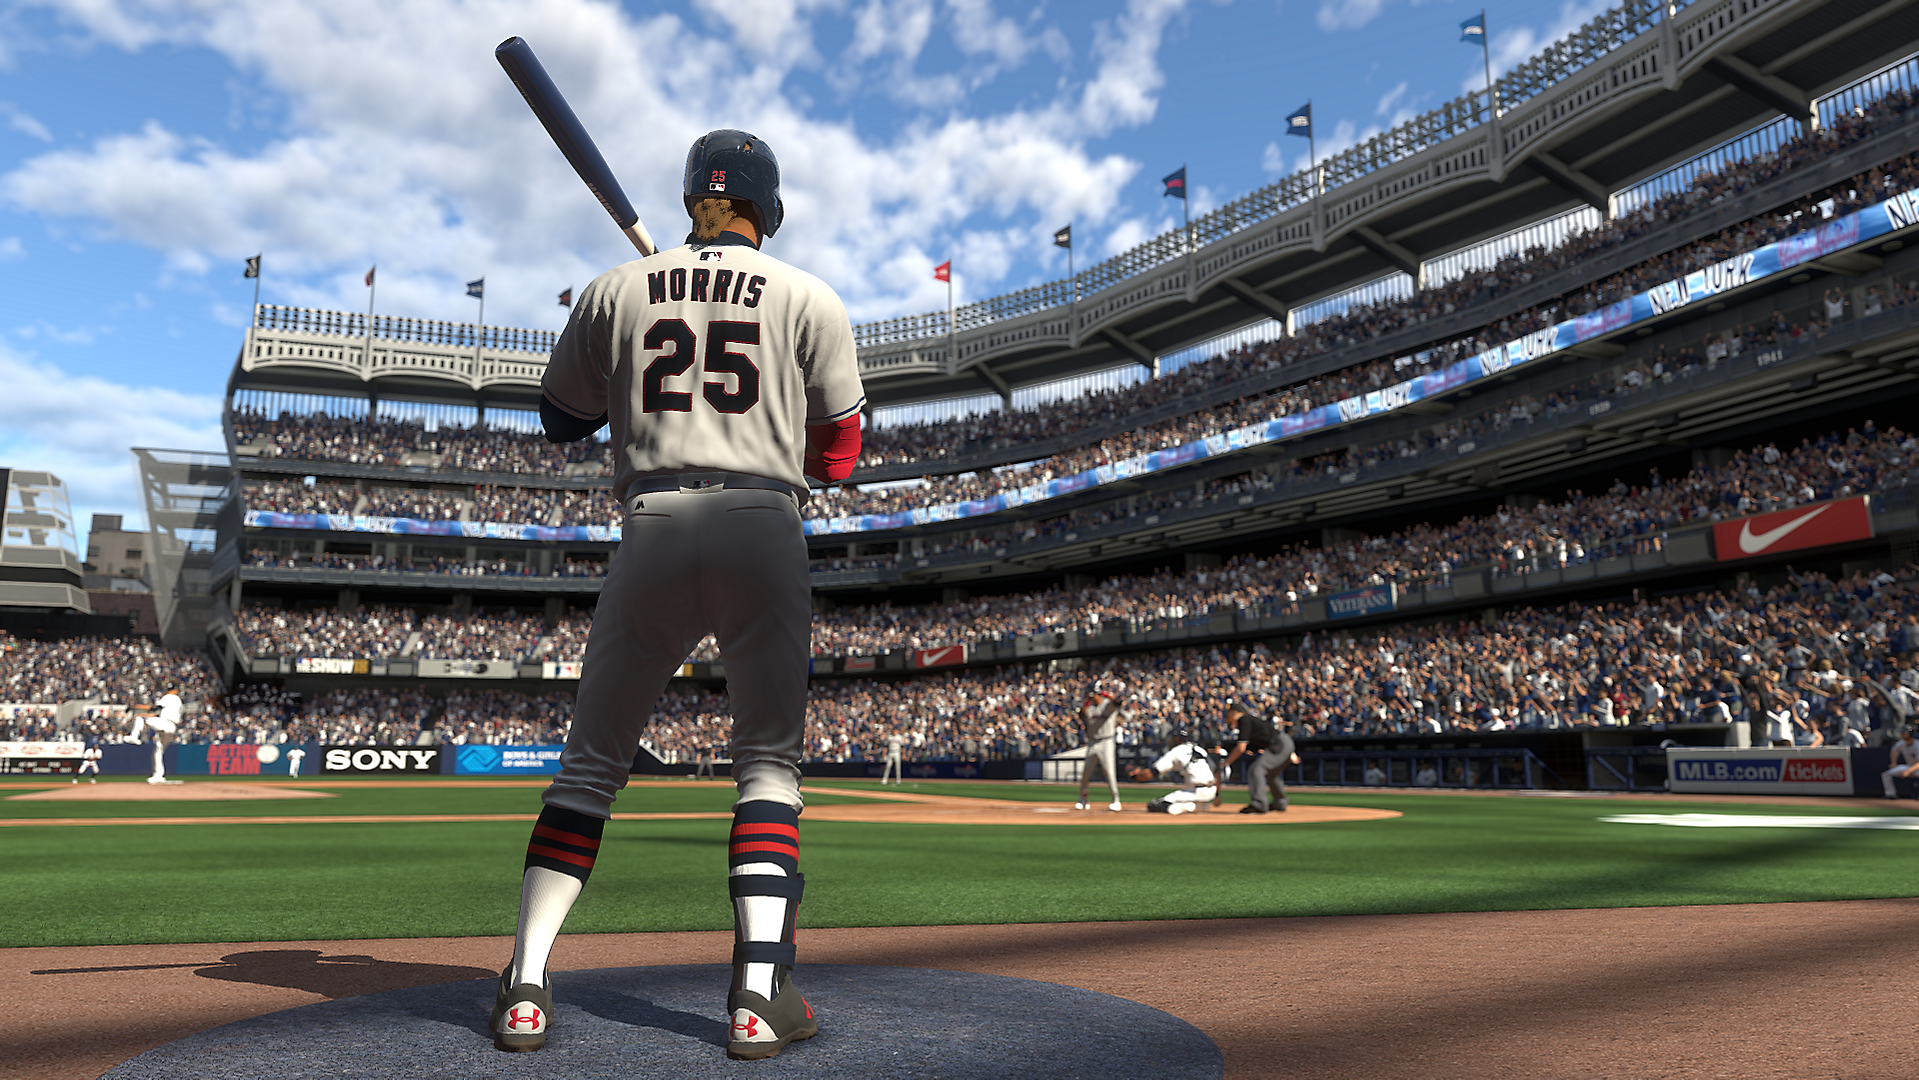 Mlb The Show Wallpapers